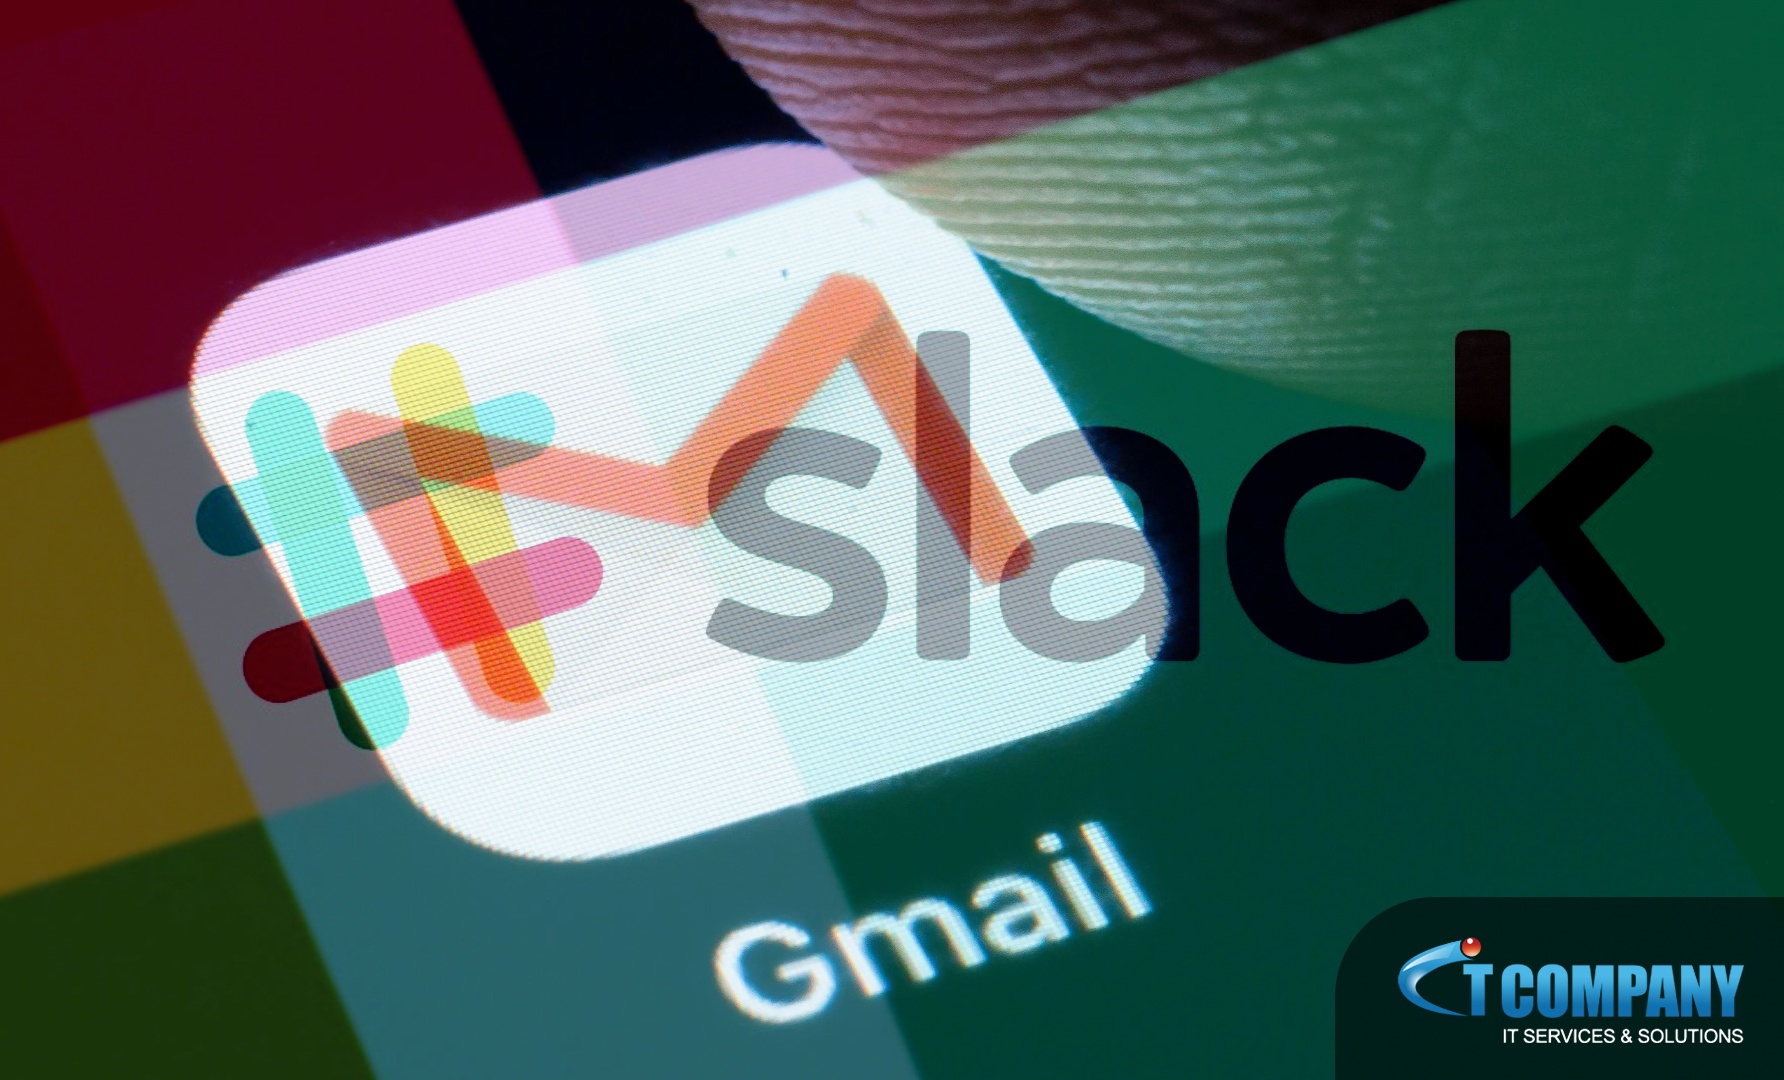 Gmail aspires for Spaces to be as good as Slack